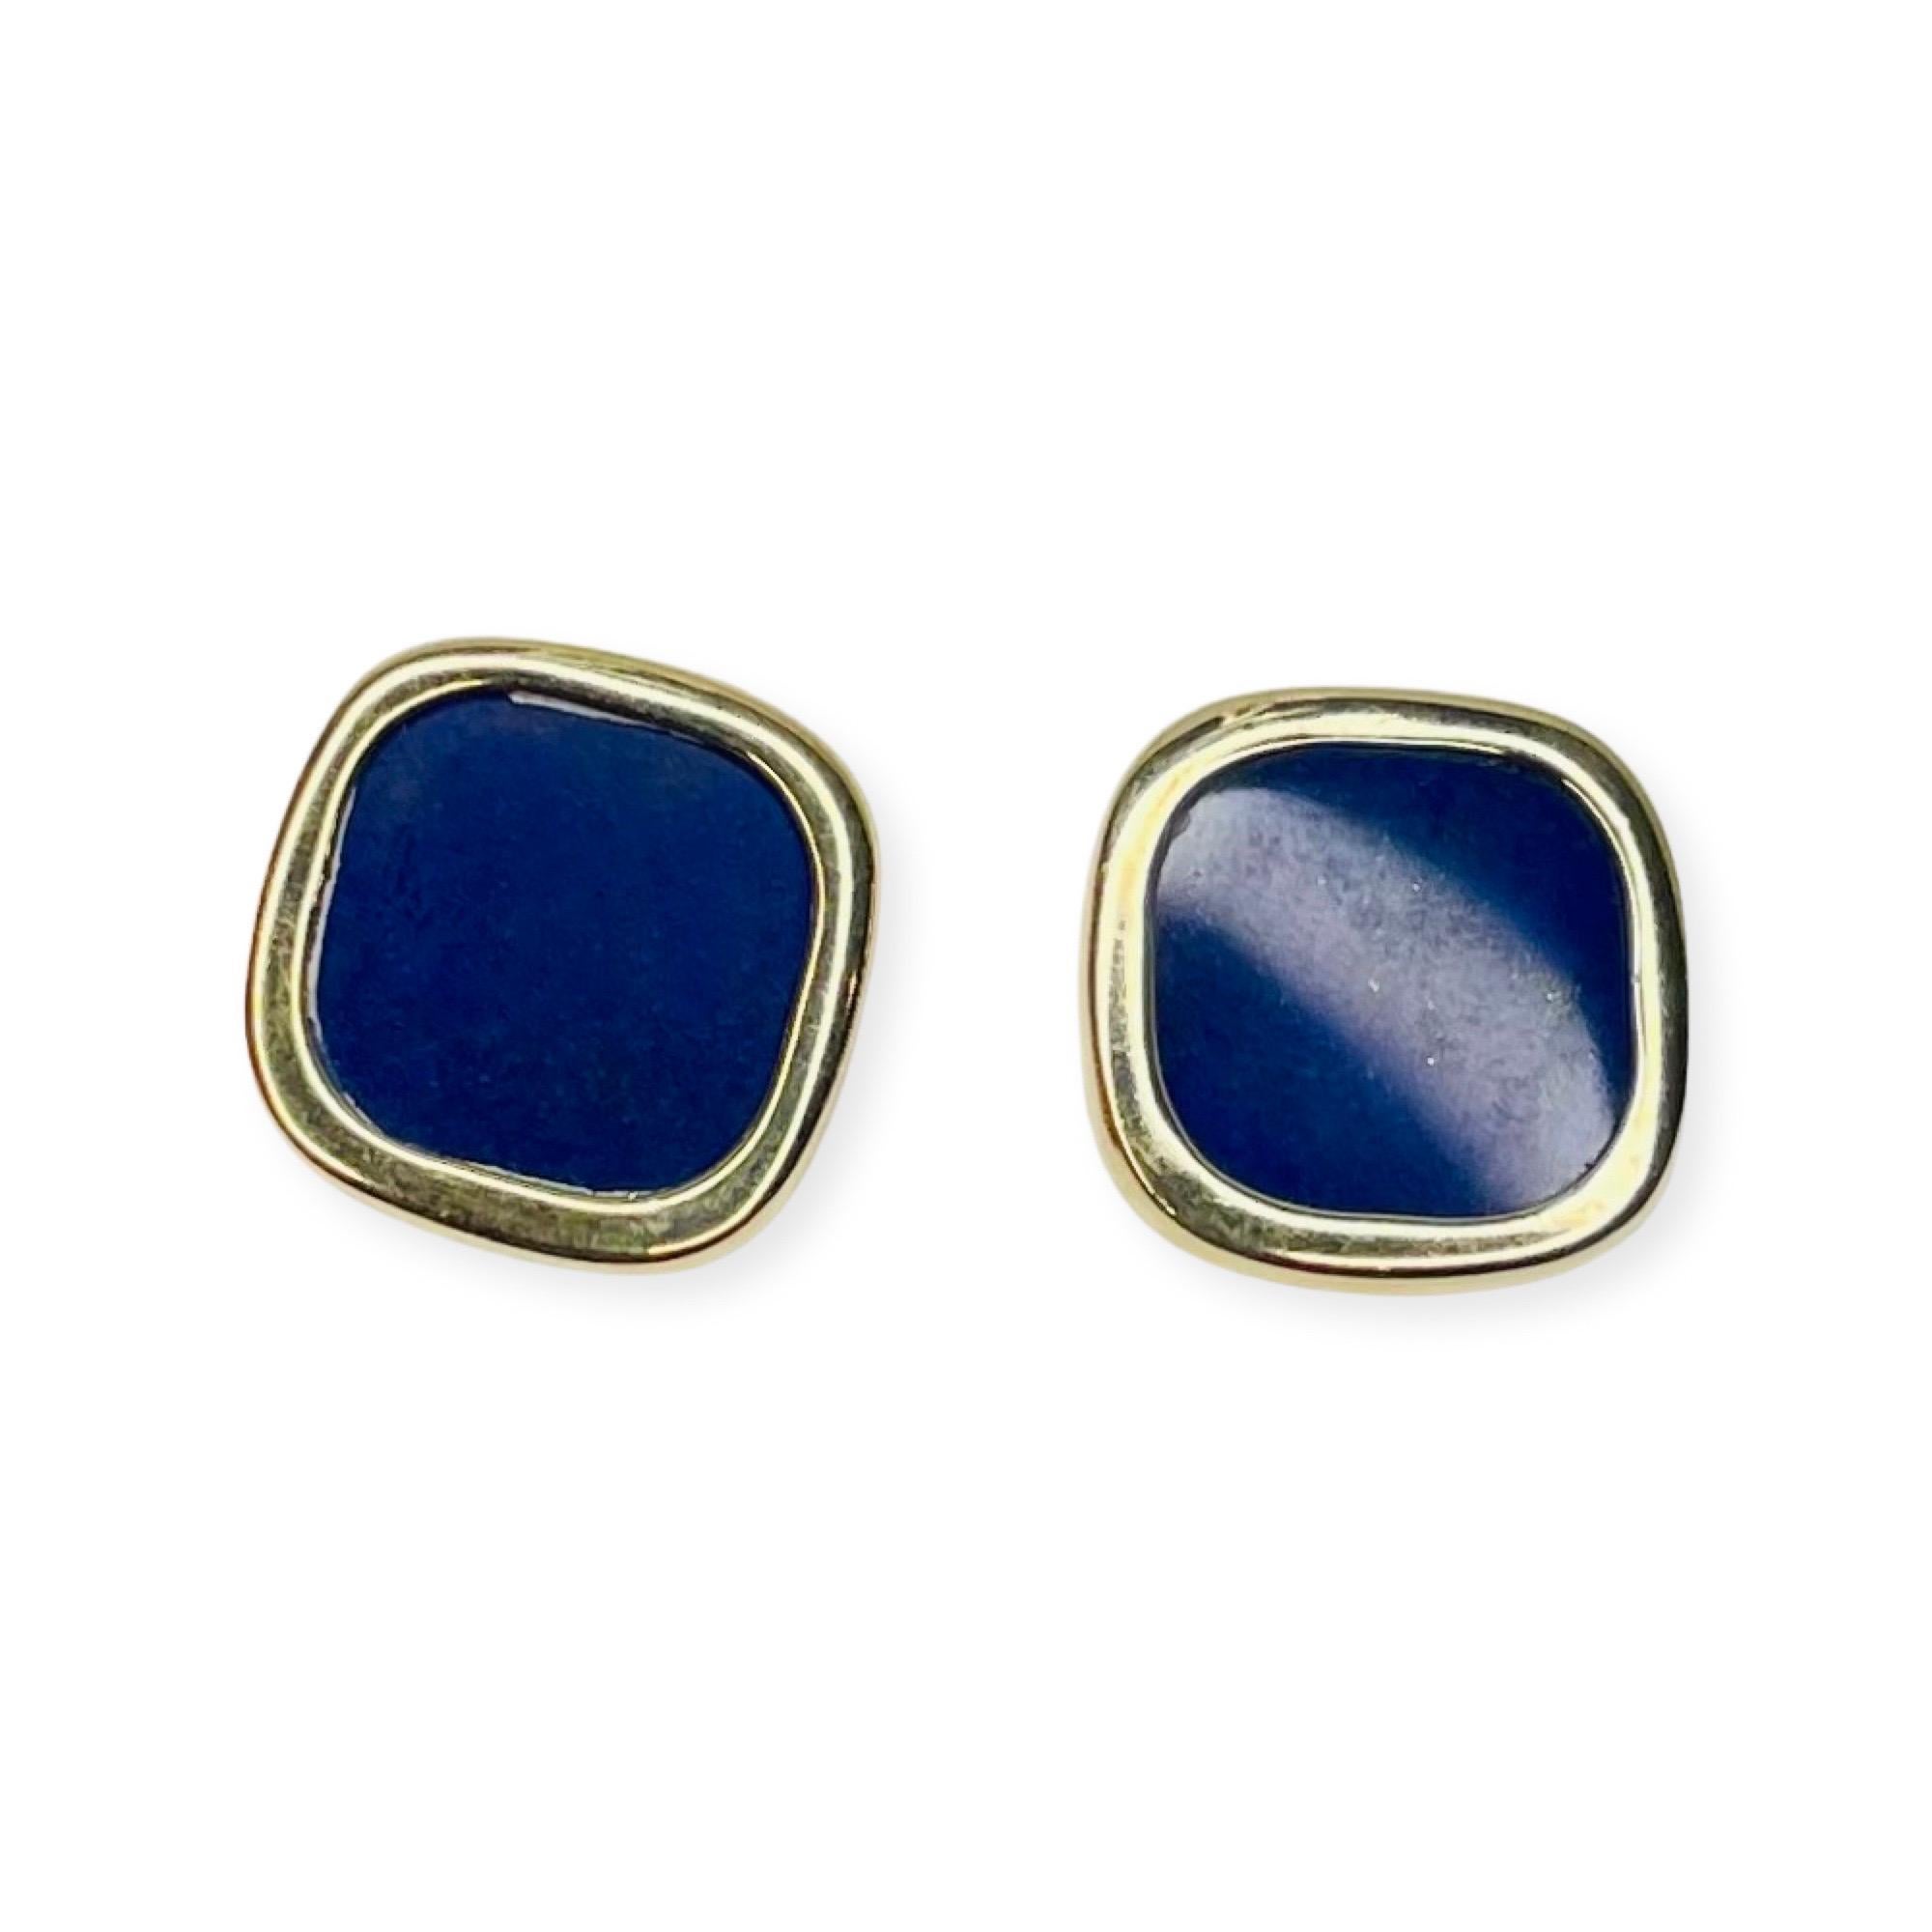 Lithos 18K Yellow Gold Lapis Lazuli Earrings. There are 2-16.15 mm, square Lapis flats, bezel set. The lapis is very clean and natural color. The earrings have 14KY gold backs imbedded in silicone.    400-70-780 